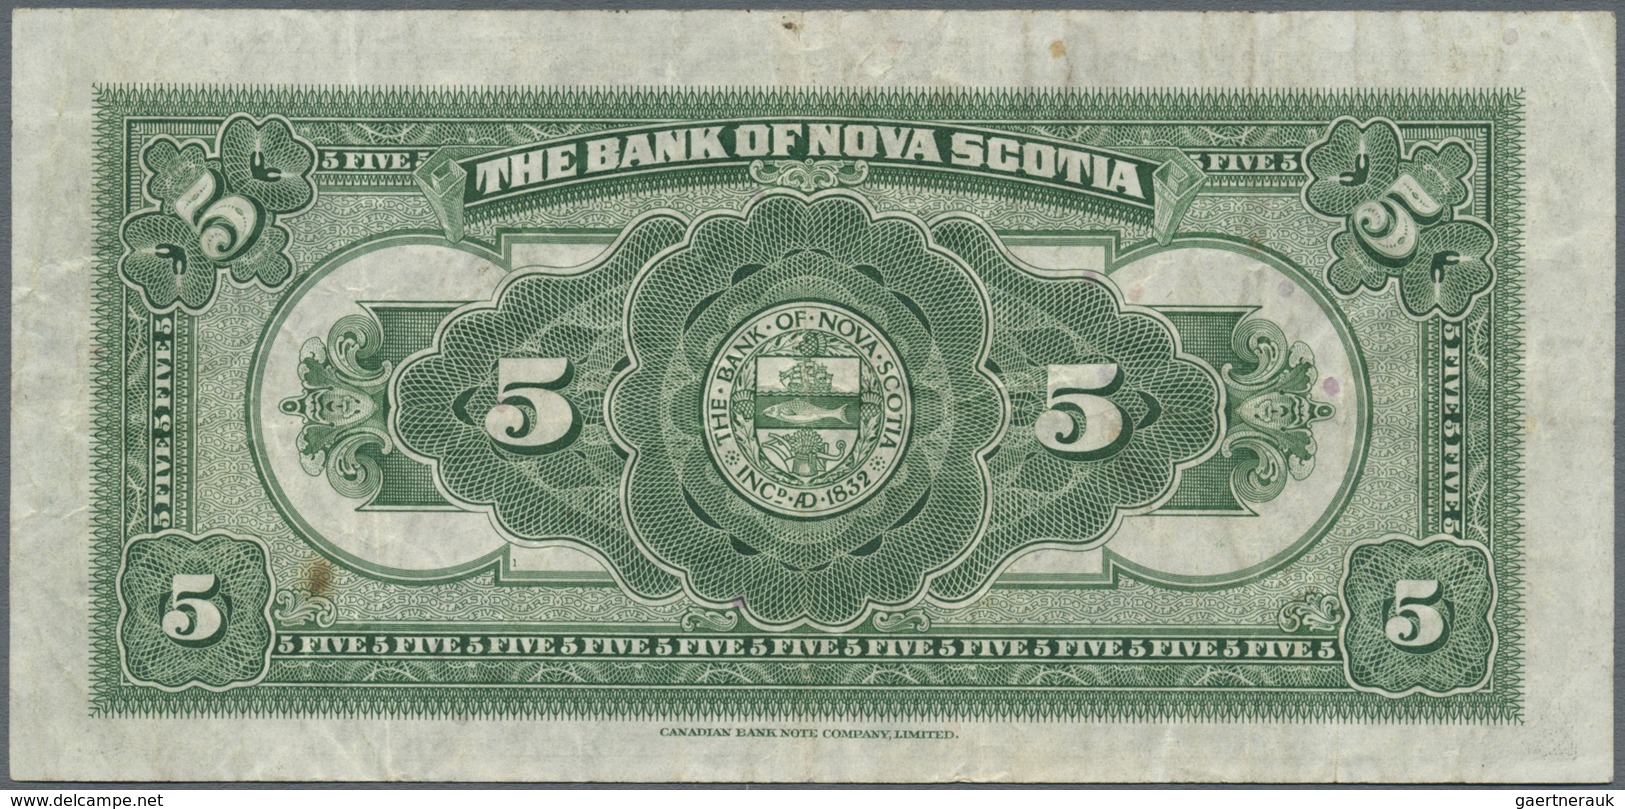 Alle Welt: Very interesting lot with 26 Banknotes comprising CanadaThe Bank of Nova Scotia 5 Dollars